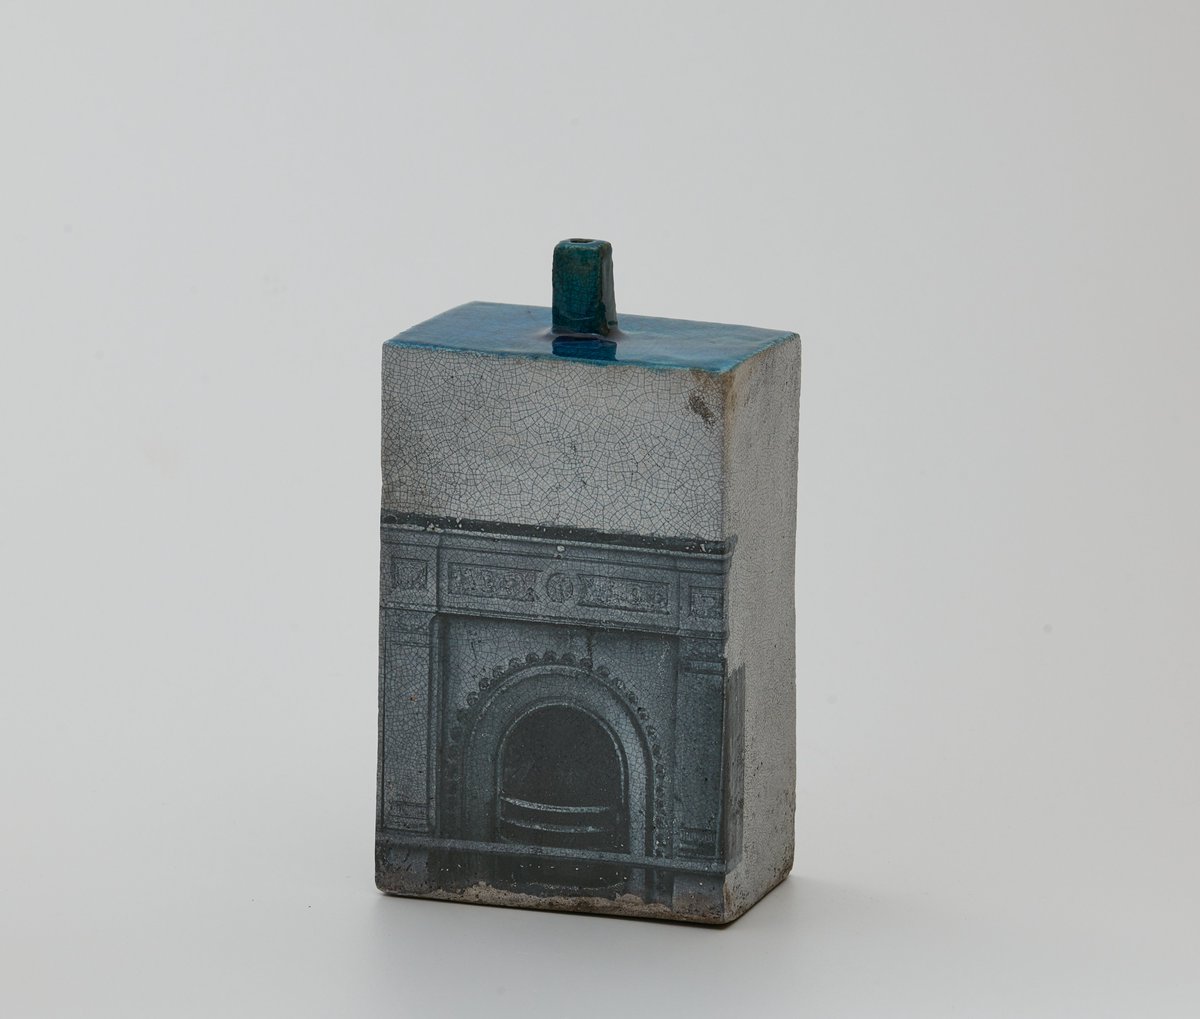 Clay and Canvas Opening Reception: Thursday 4 August, 5.30-7.30pm All welcome!! More information at lavitgallery.com/clay-and-canva… img: Sarah Rosingrave, Fireplace, 2020, Raku fired stonewear